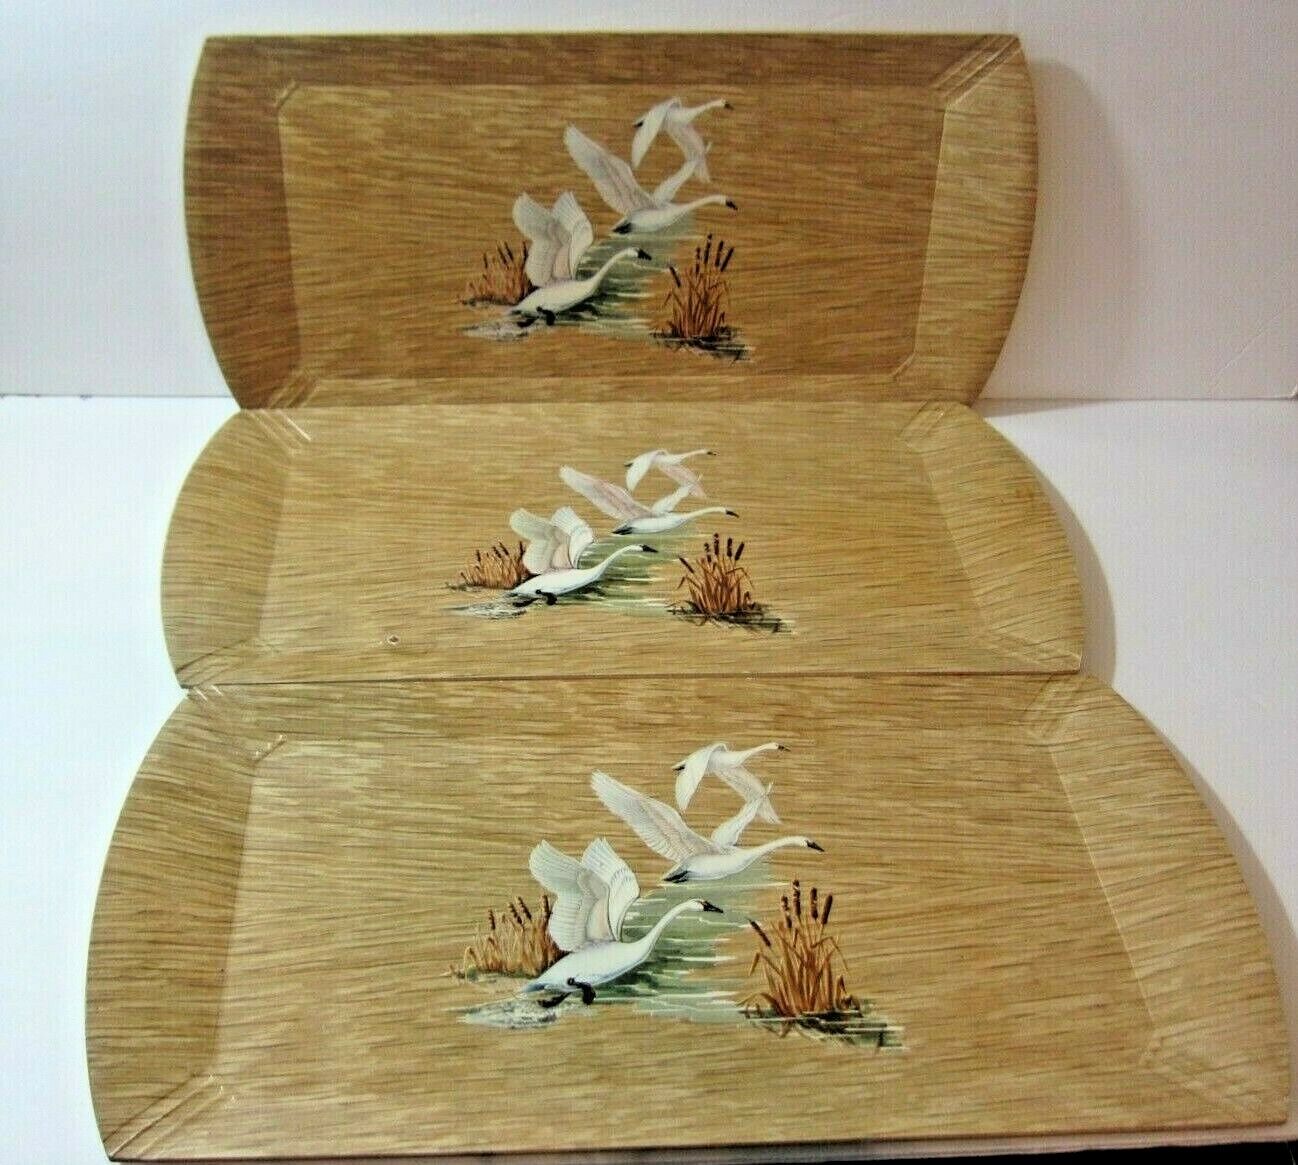 Haskelite Trumpeter Swans Lithograph Paper Lot of 3 Wood Serving Trays 7.5x16 